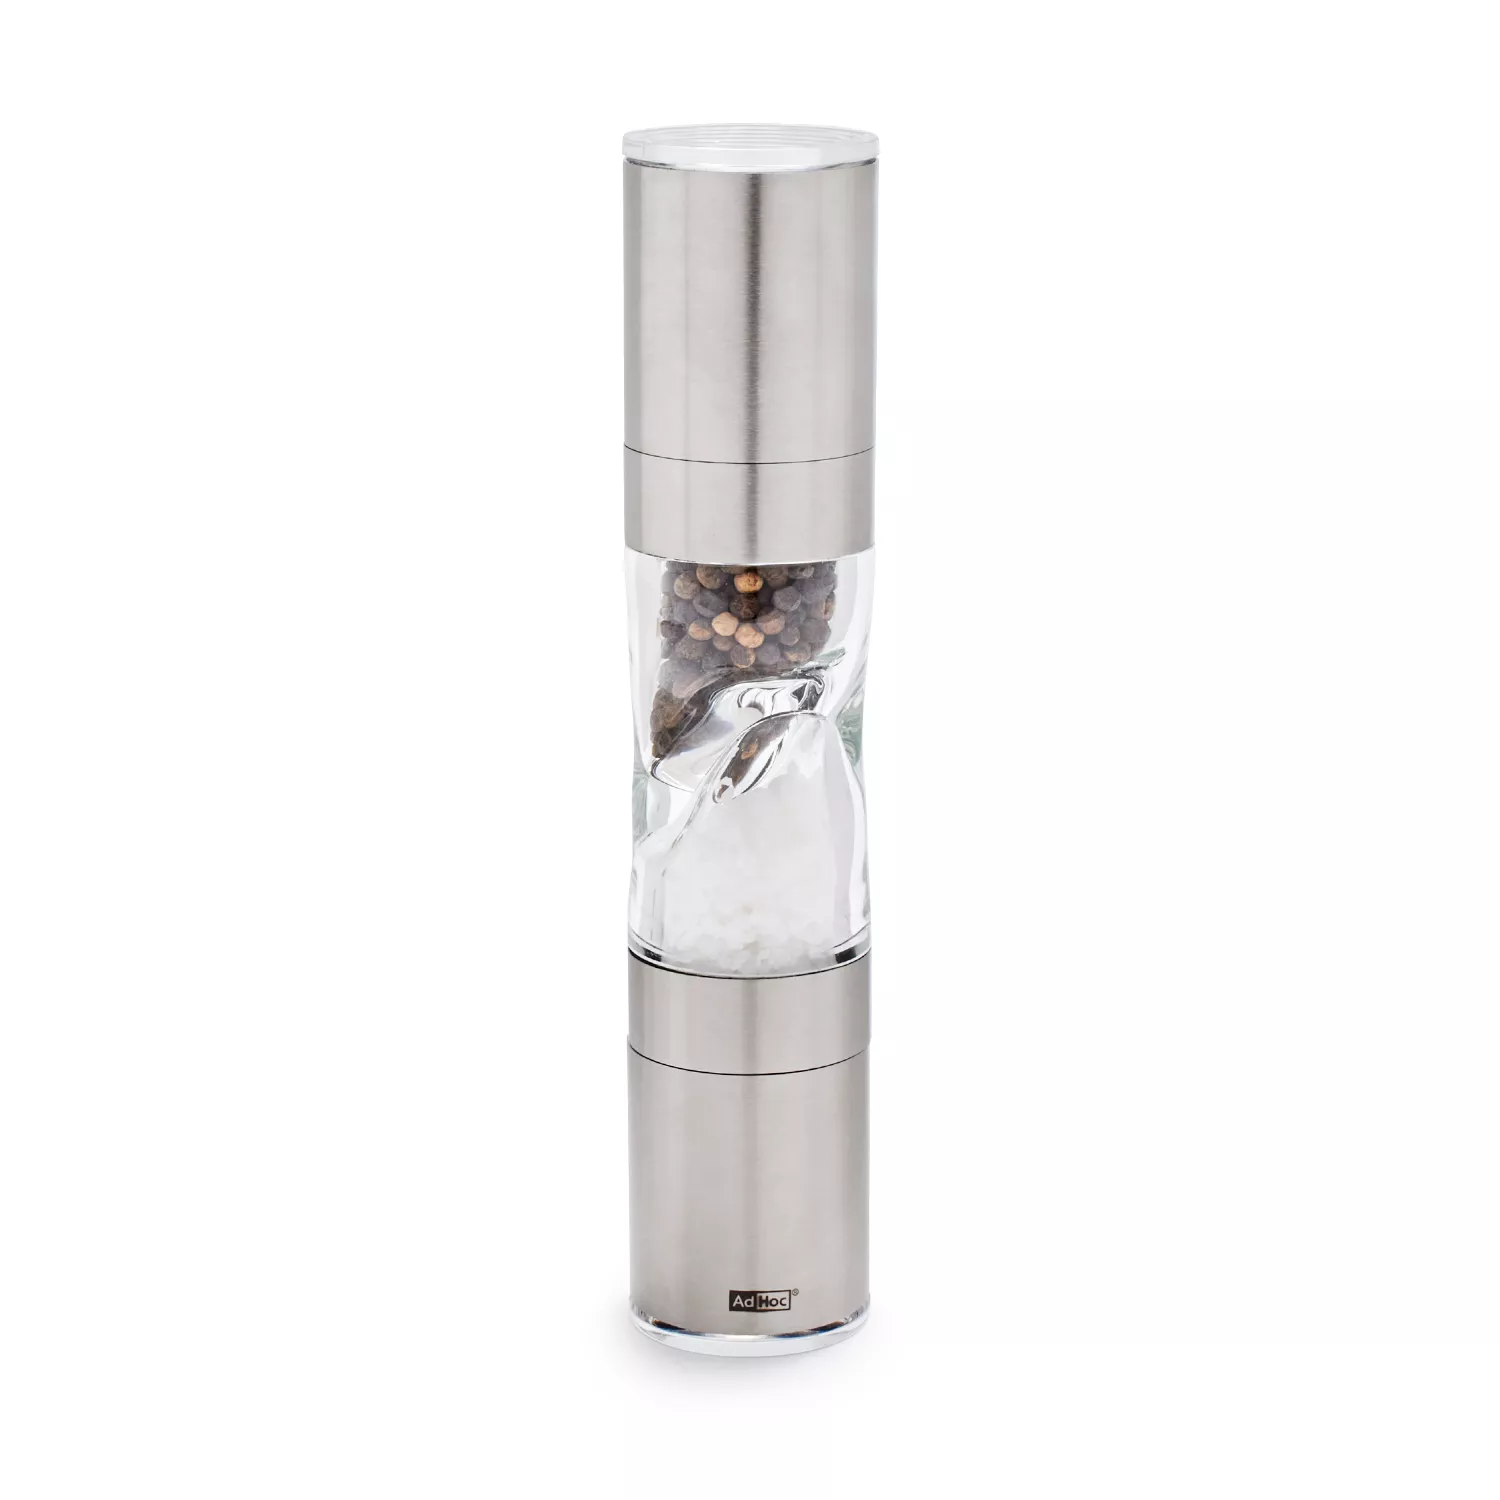 Double electric salt and pepper mill, Blue - Cuisinart